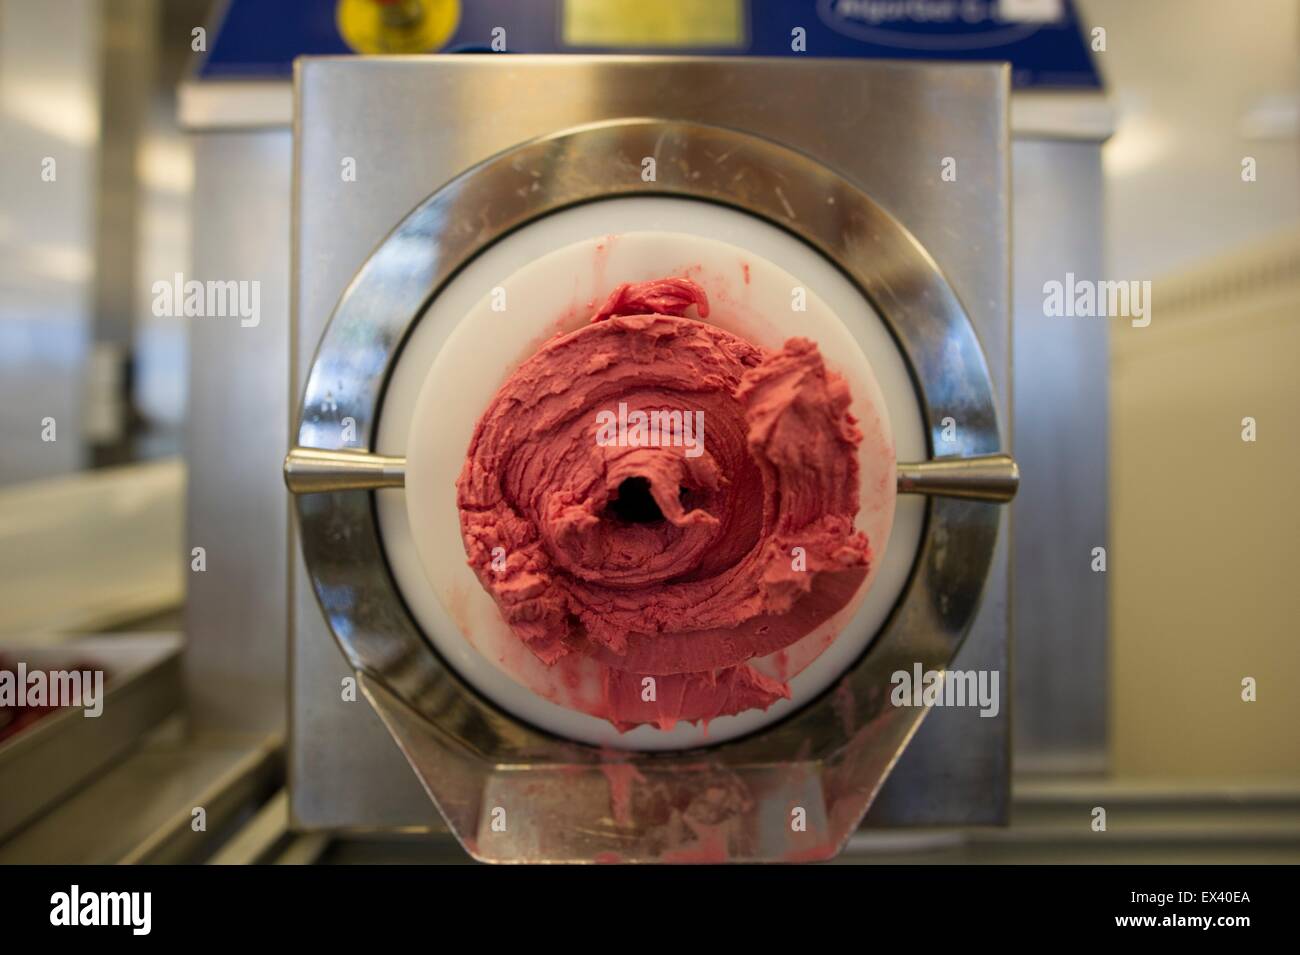 Berlin, Germany. 01st July, 2015. Cherry ice cream comes out of a machine at ice cream manufacturer Florida Eis in Berlin, Germany, 01 July 2015. Around 200 employees are involved in the production and selling of about 80 different kinds of ice cream. Photo: Paul Zinken/dpa/Alamy Live News Stock Photo